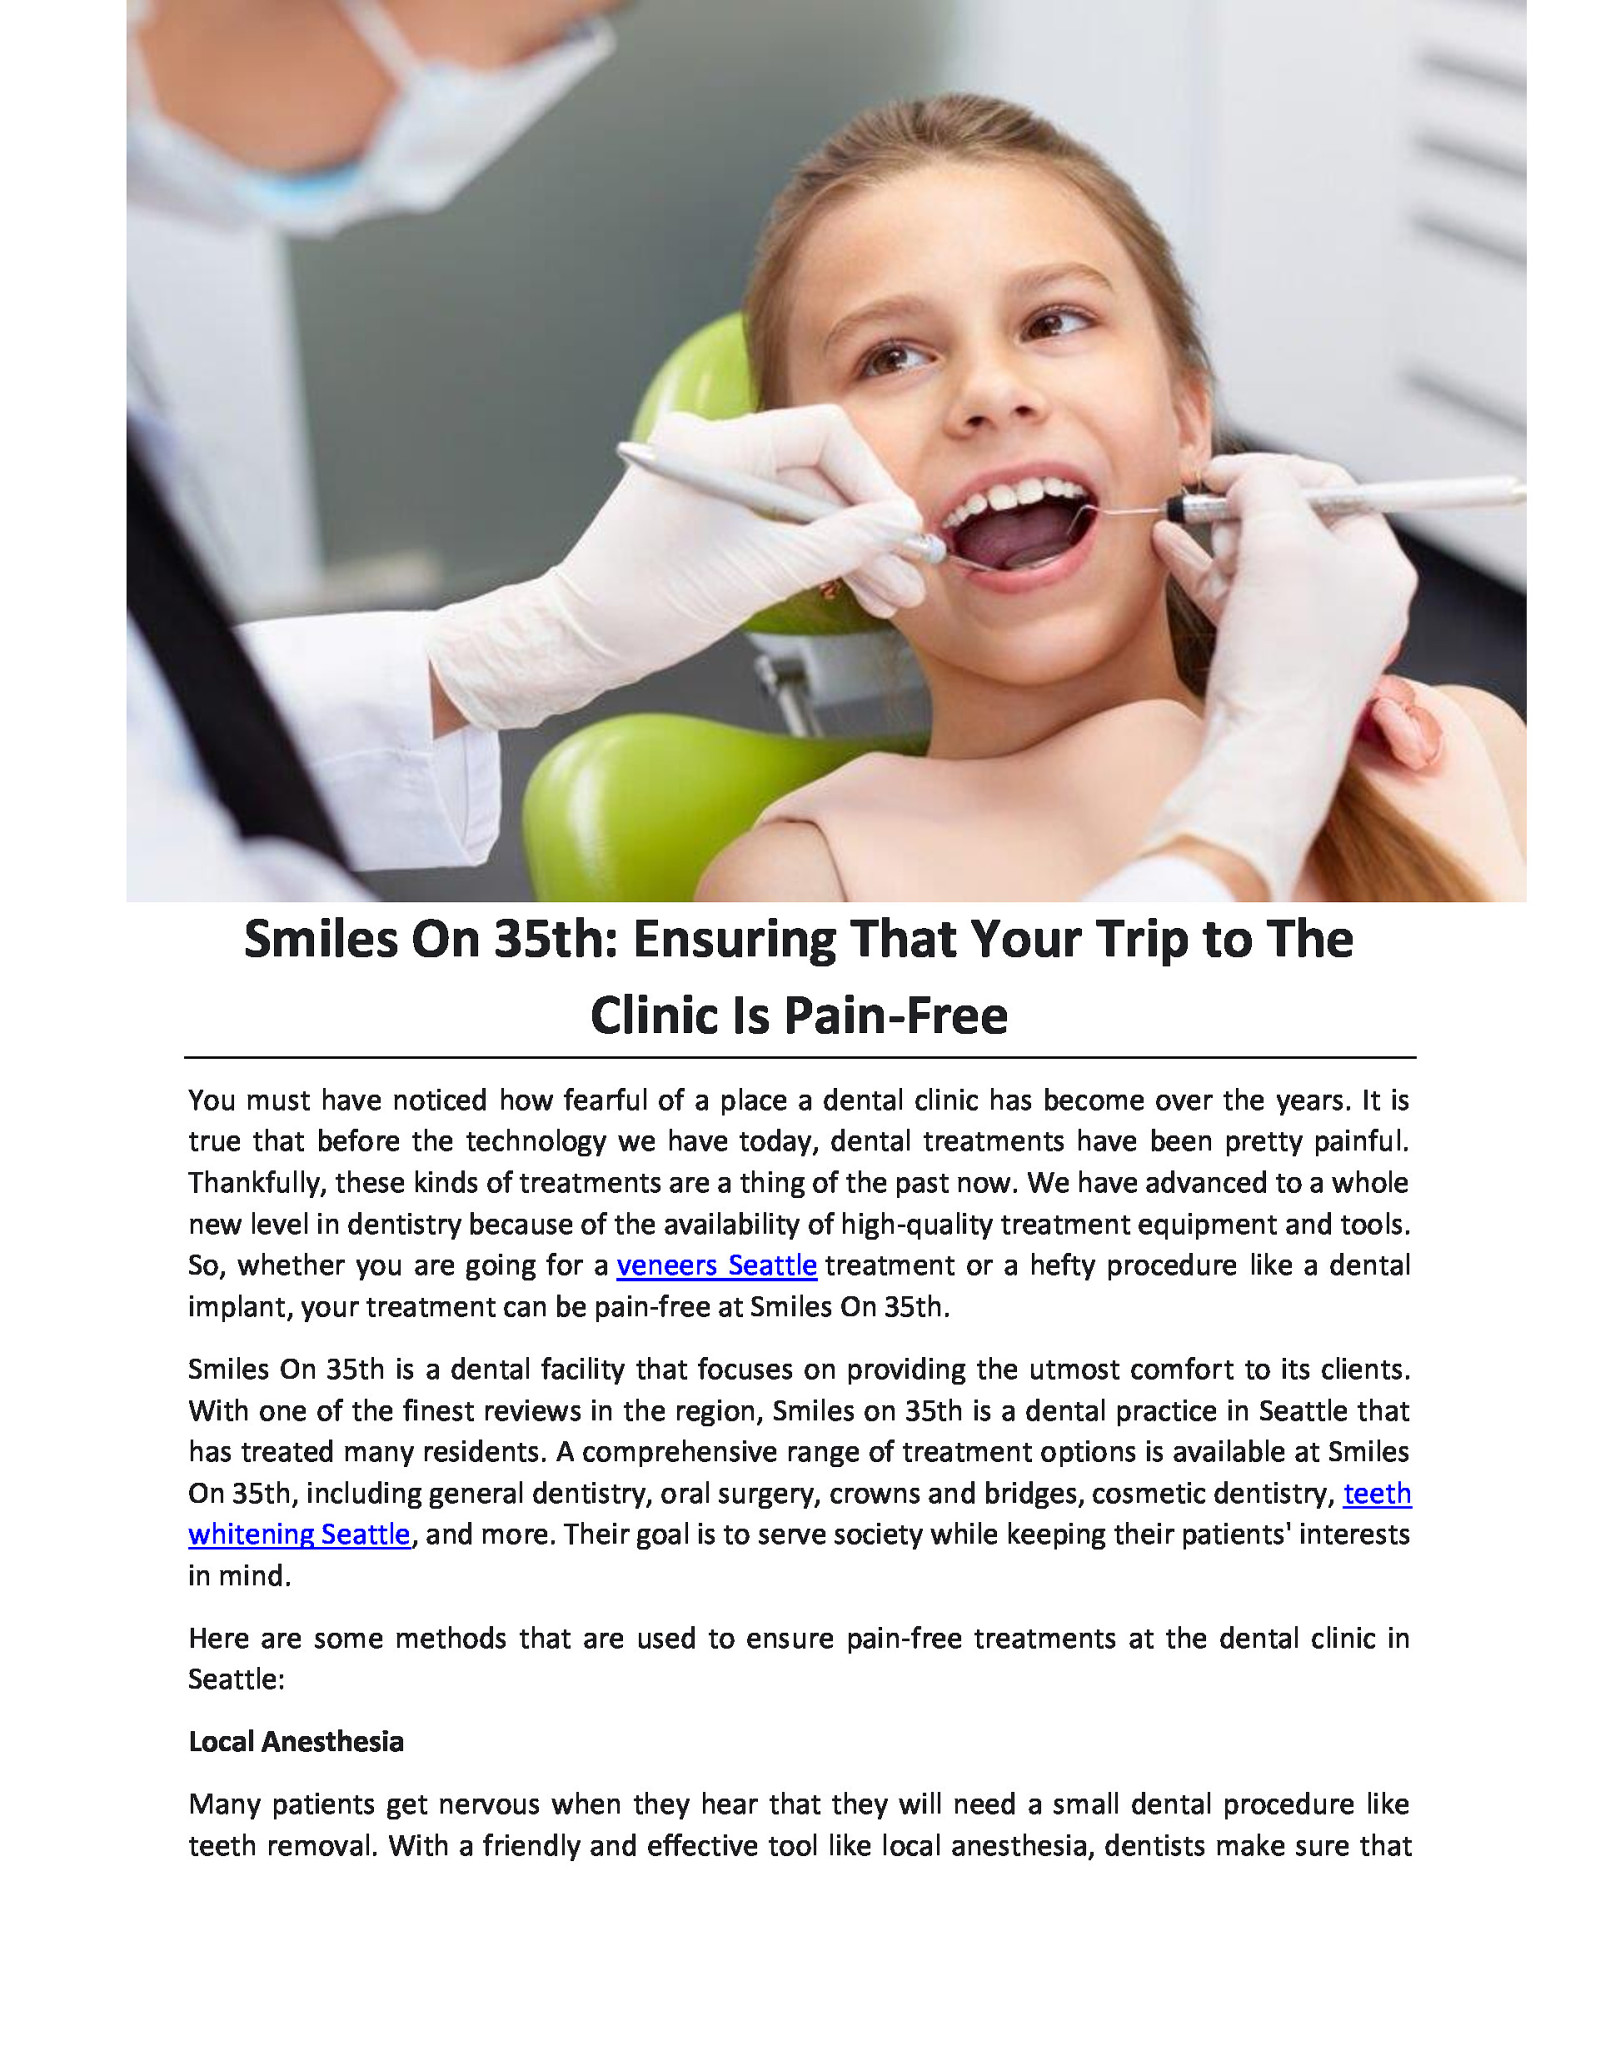 Smiles On 35th: Ensuring That Your Trip to The Clinic Is Pain-Free by Smiles On 35th